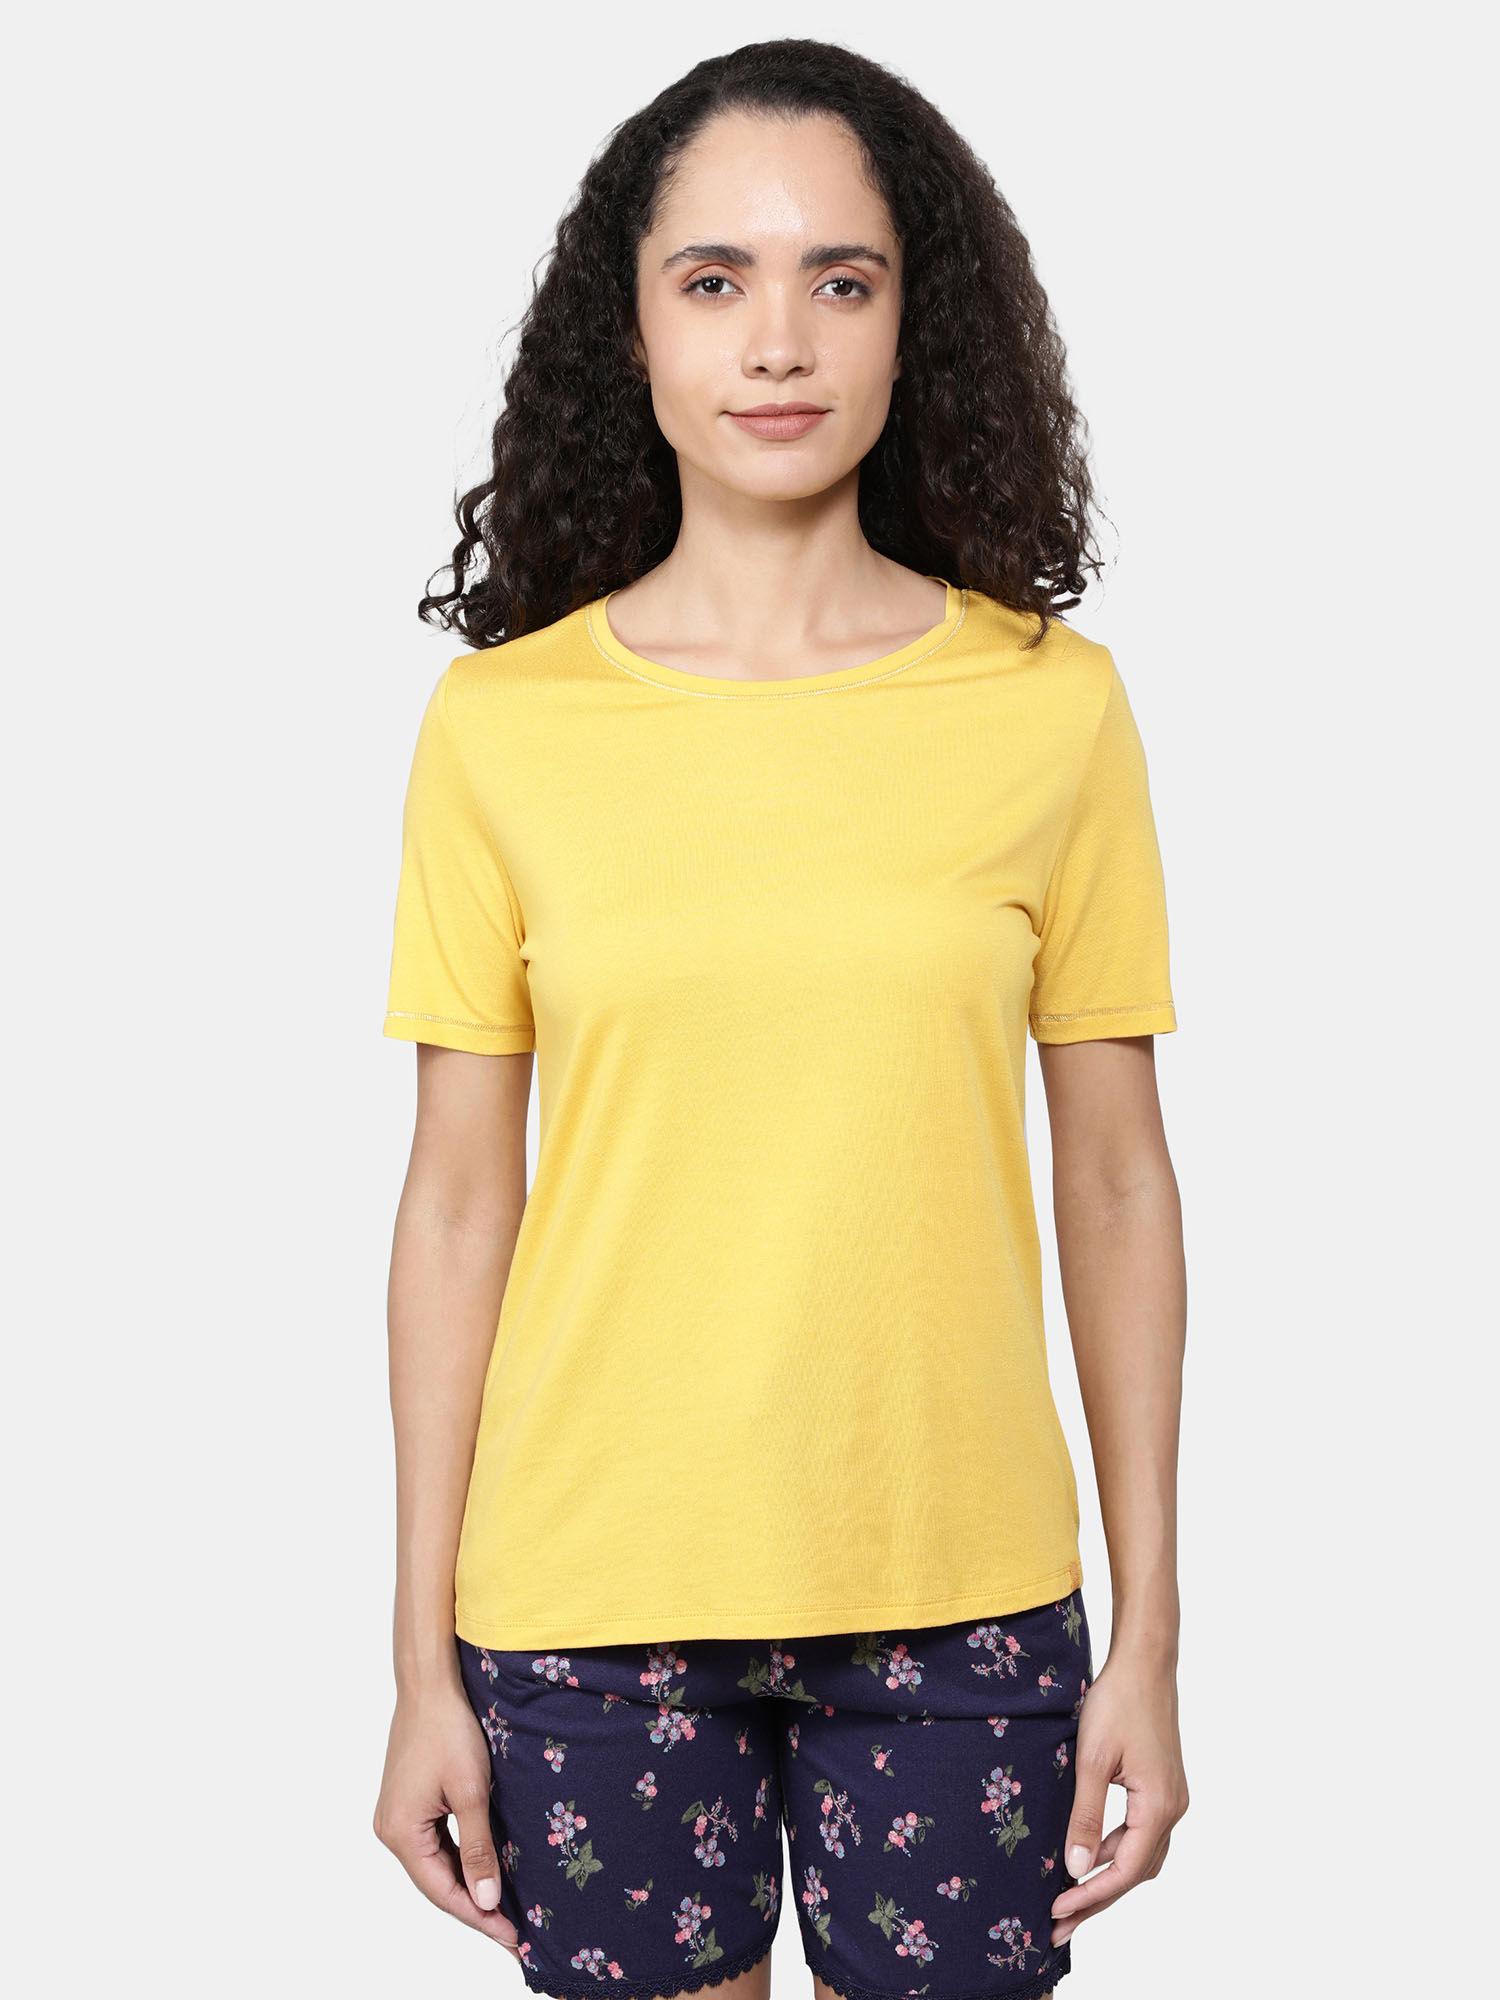 rx71 womens micro modal cotton relaxed fit round neck t-shirt- yolk yellow